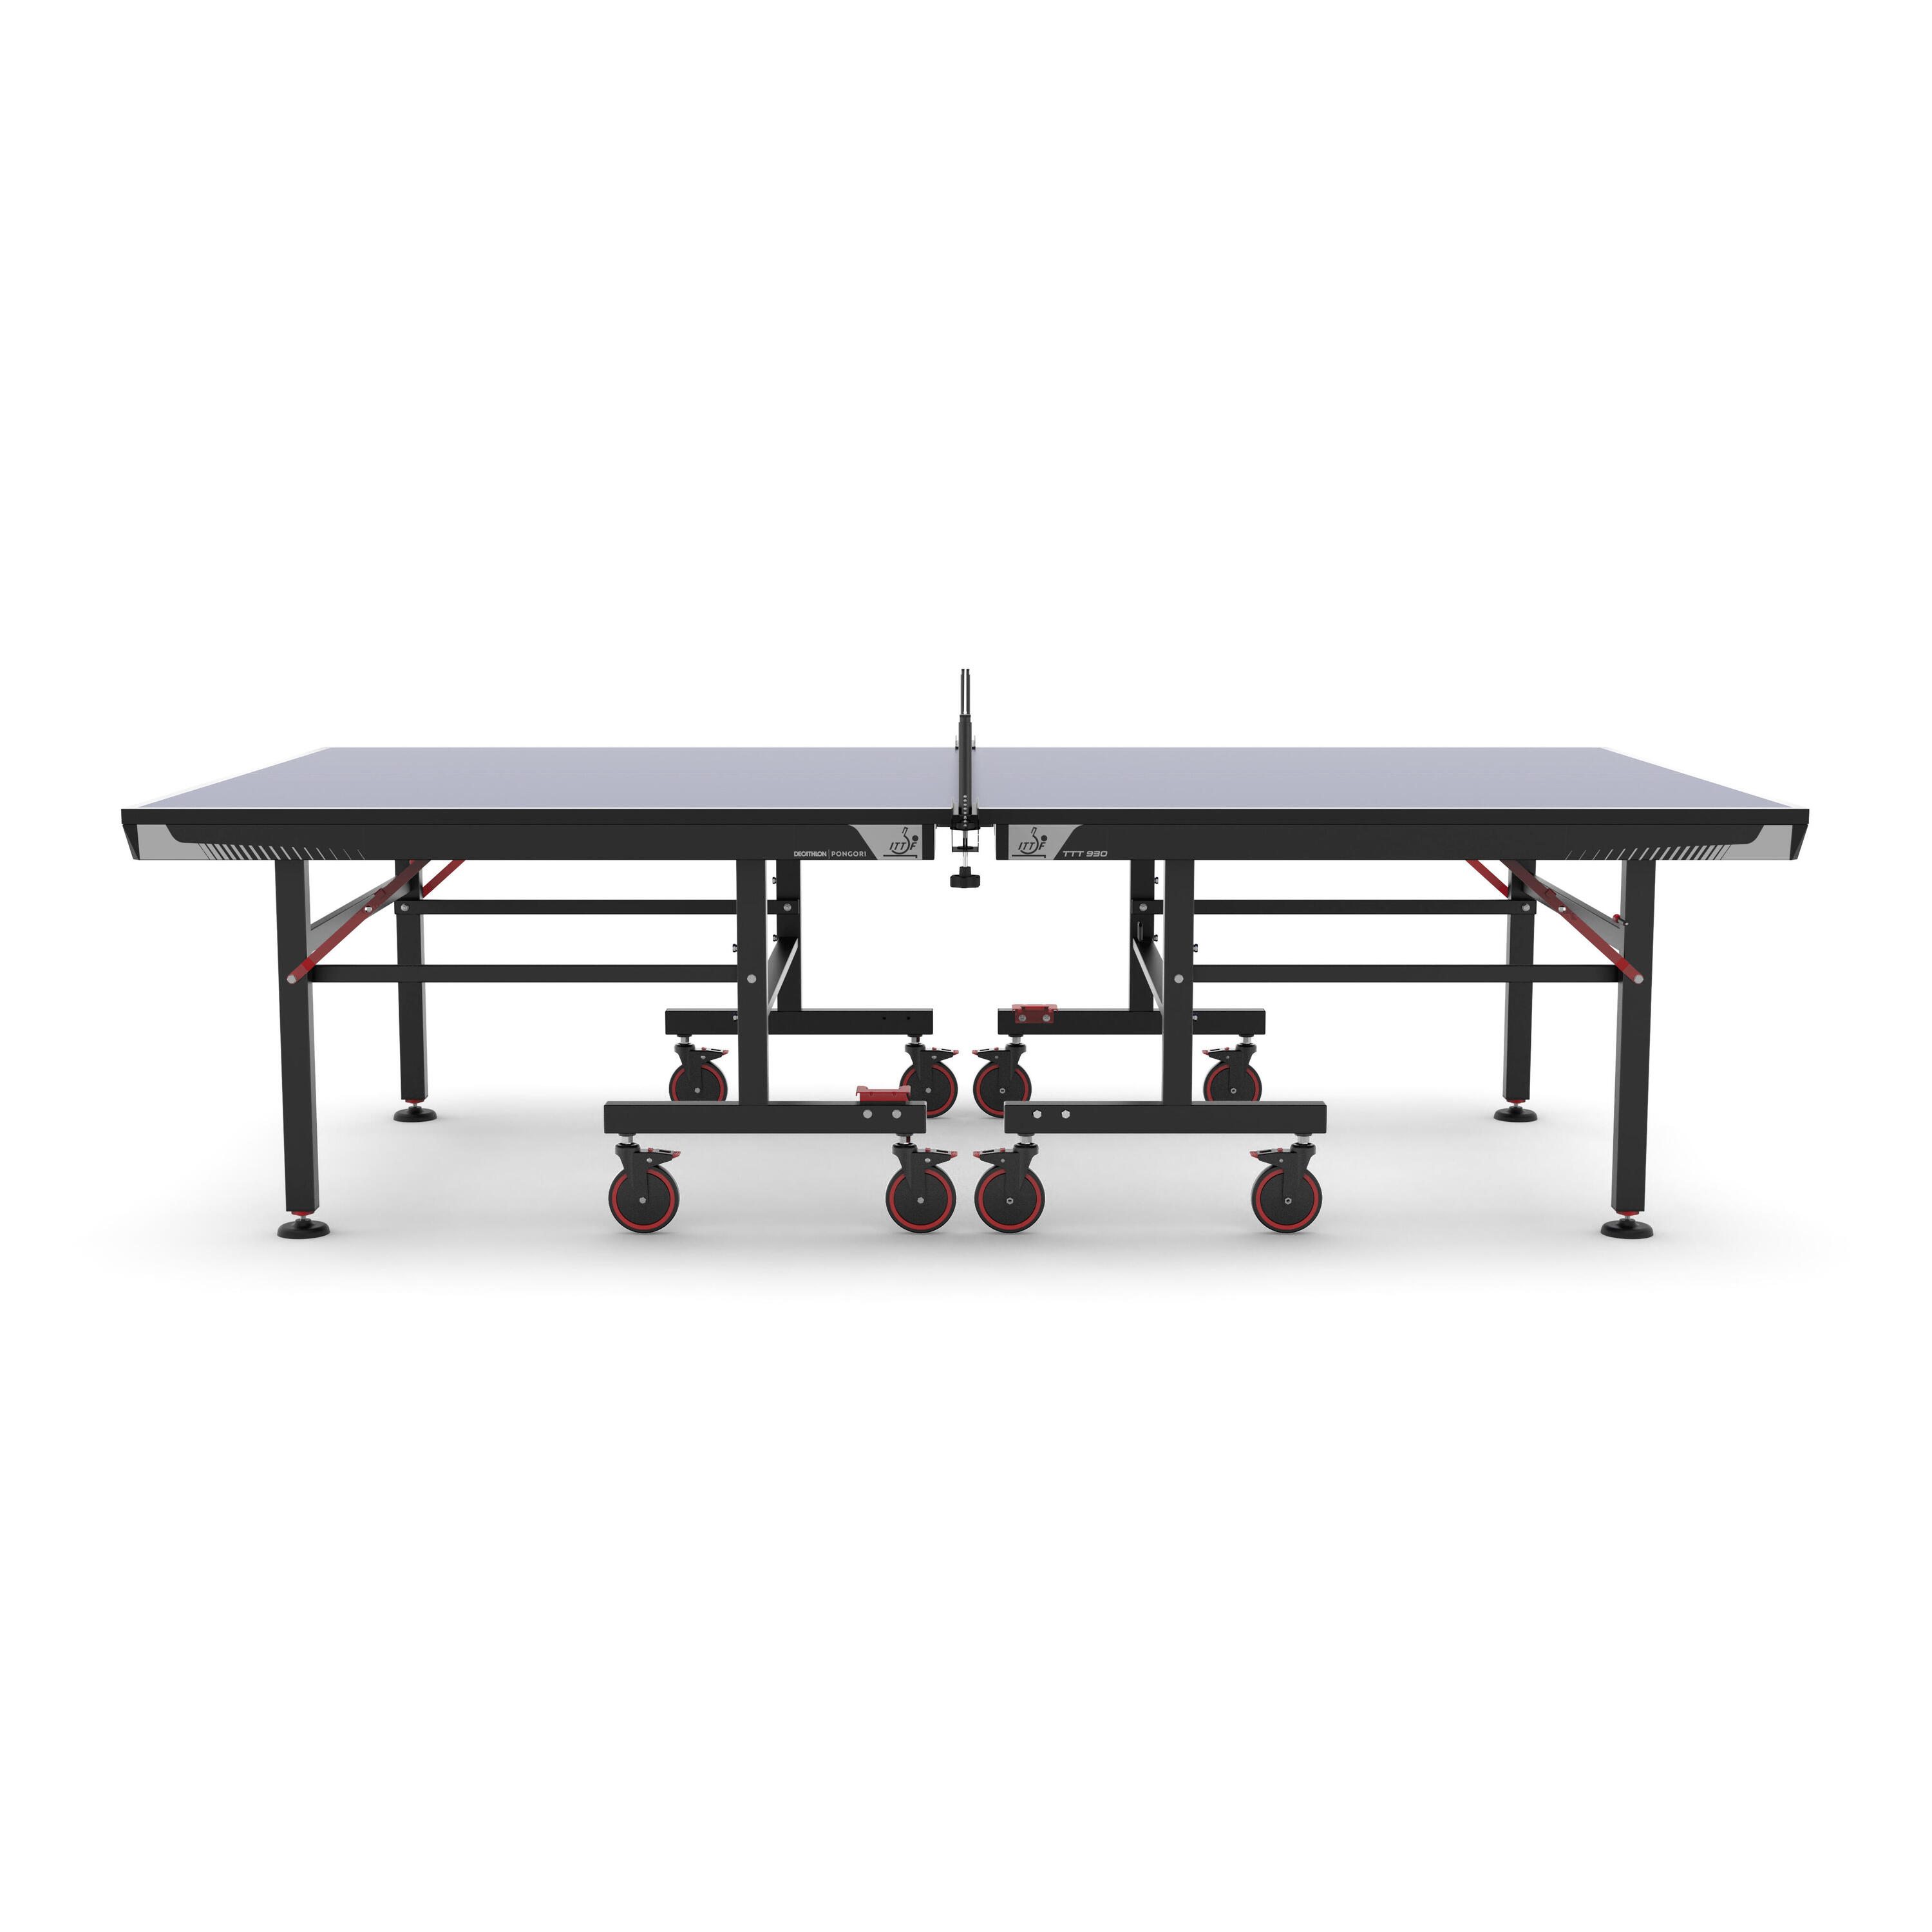 ITTF-Approved Club Table Tennis Table TTT 930 with Blue Tabletops 5/15